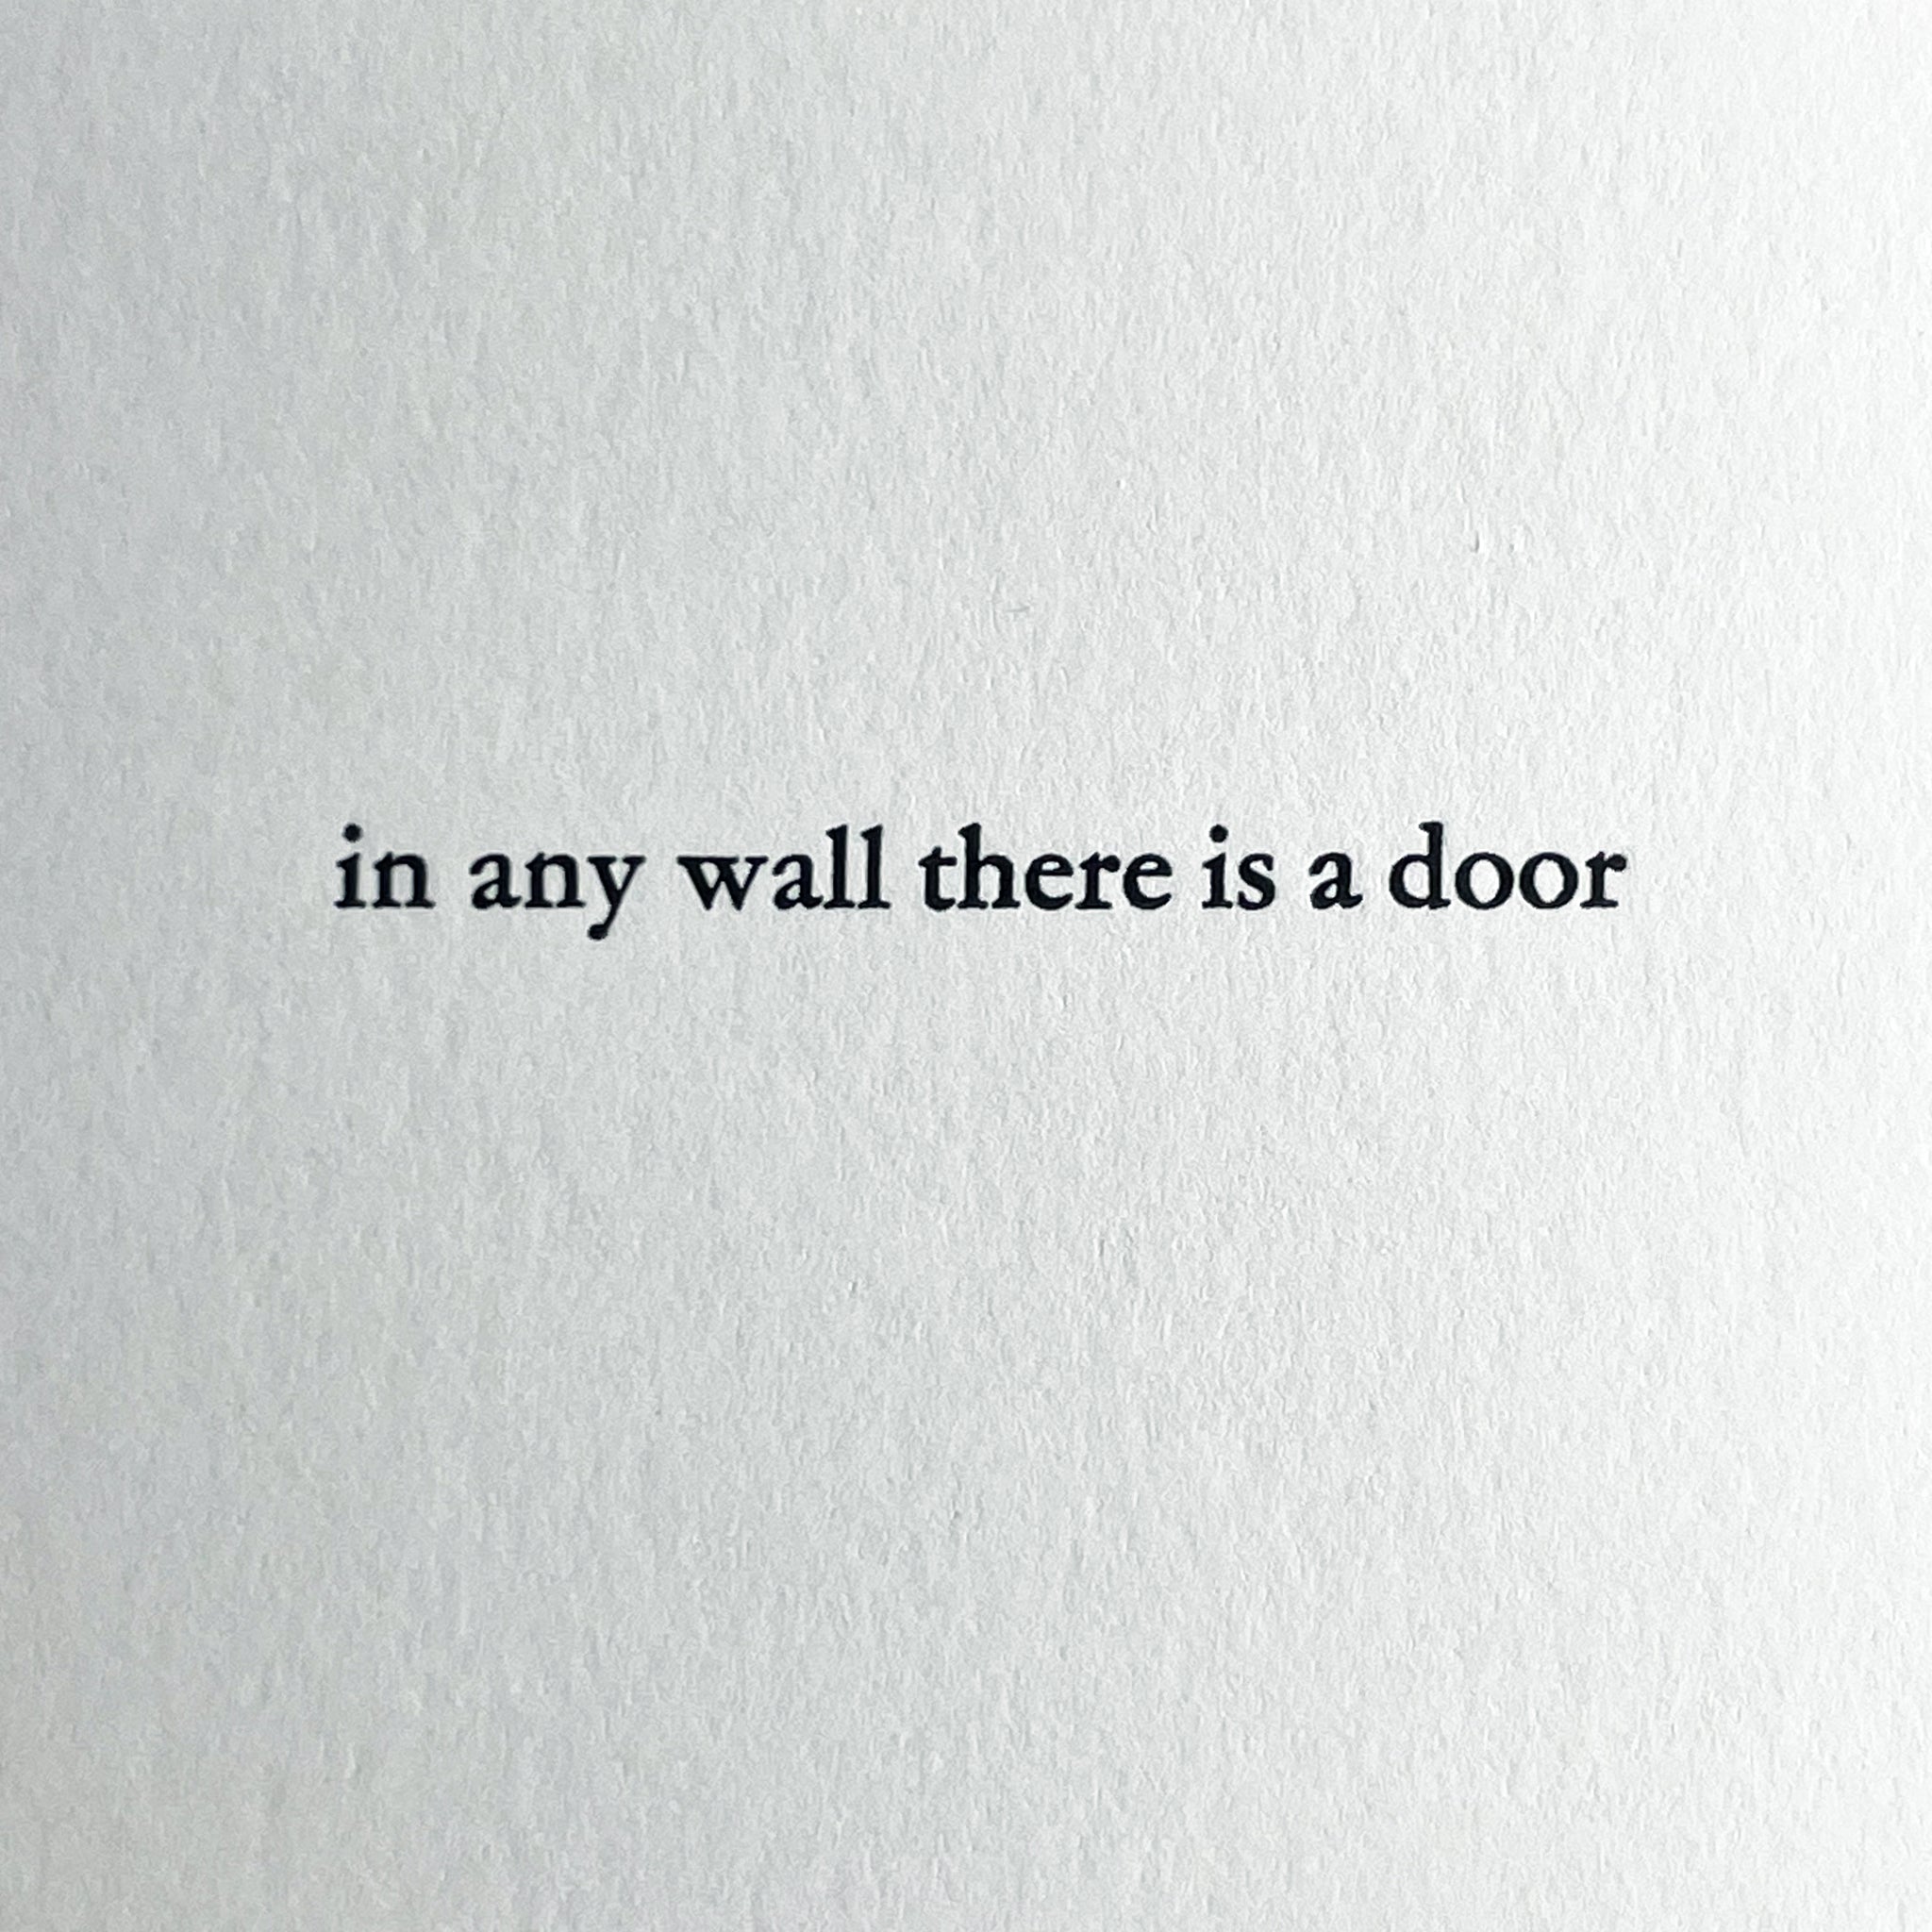 in any wall there is a door